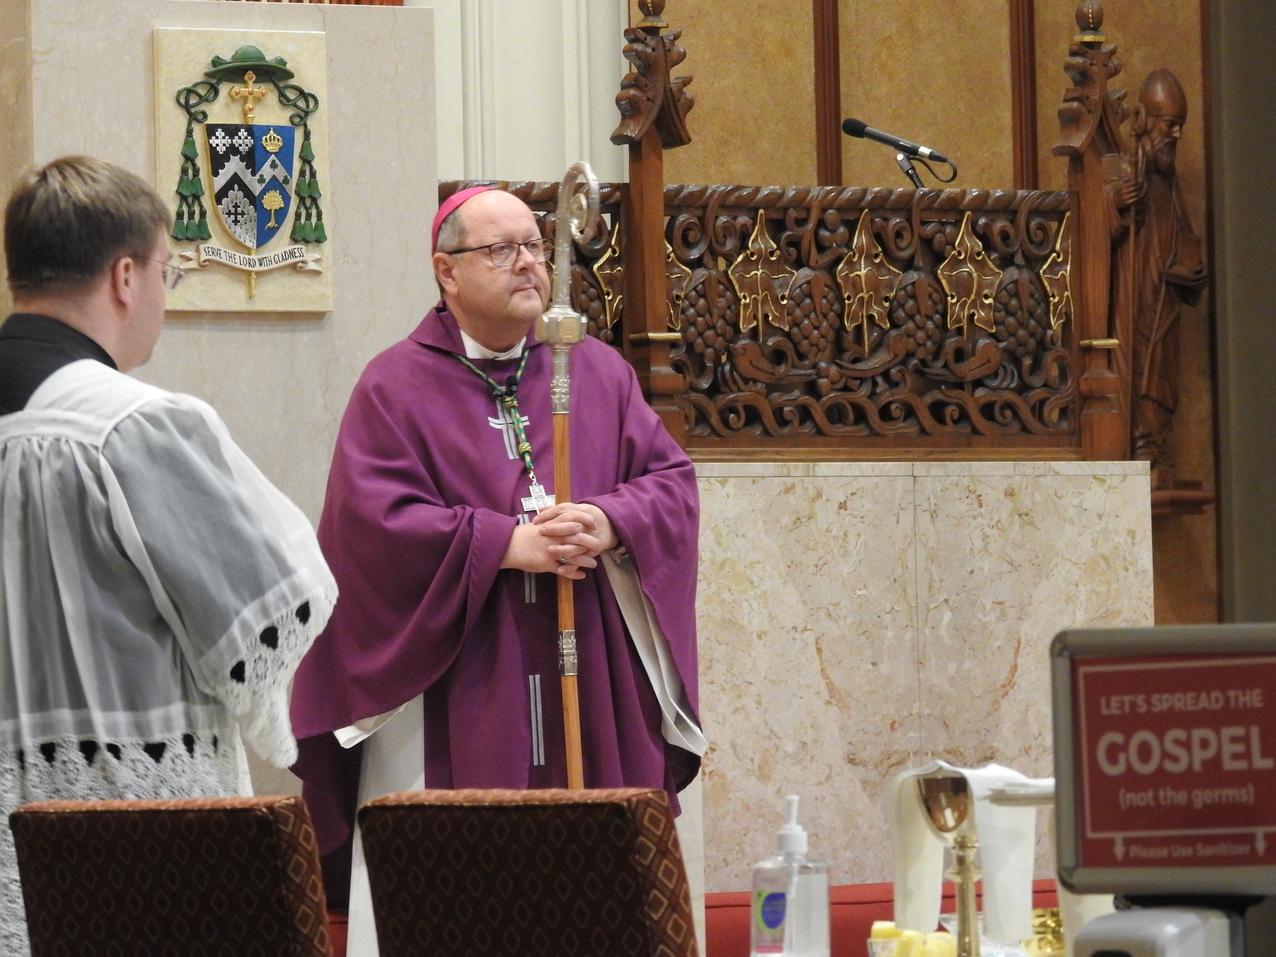 Bishop Malesic: Ashes symbolize our human limitations, mortality and sins